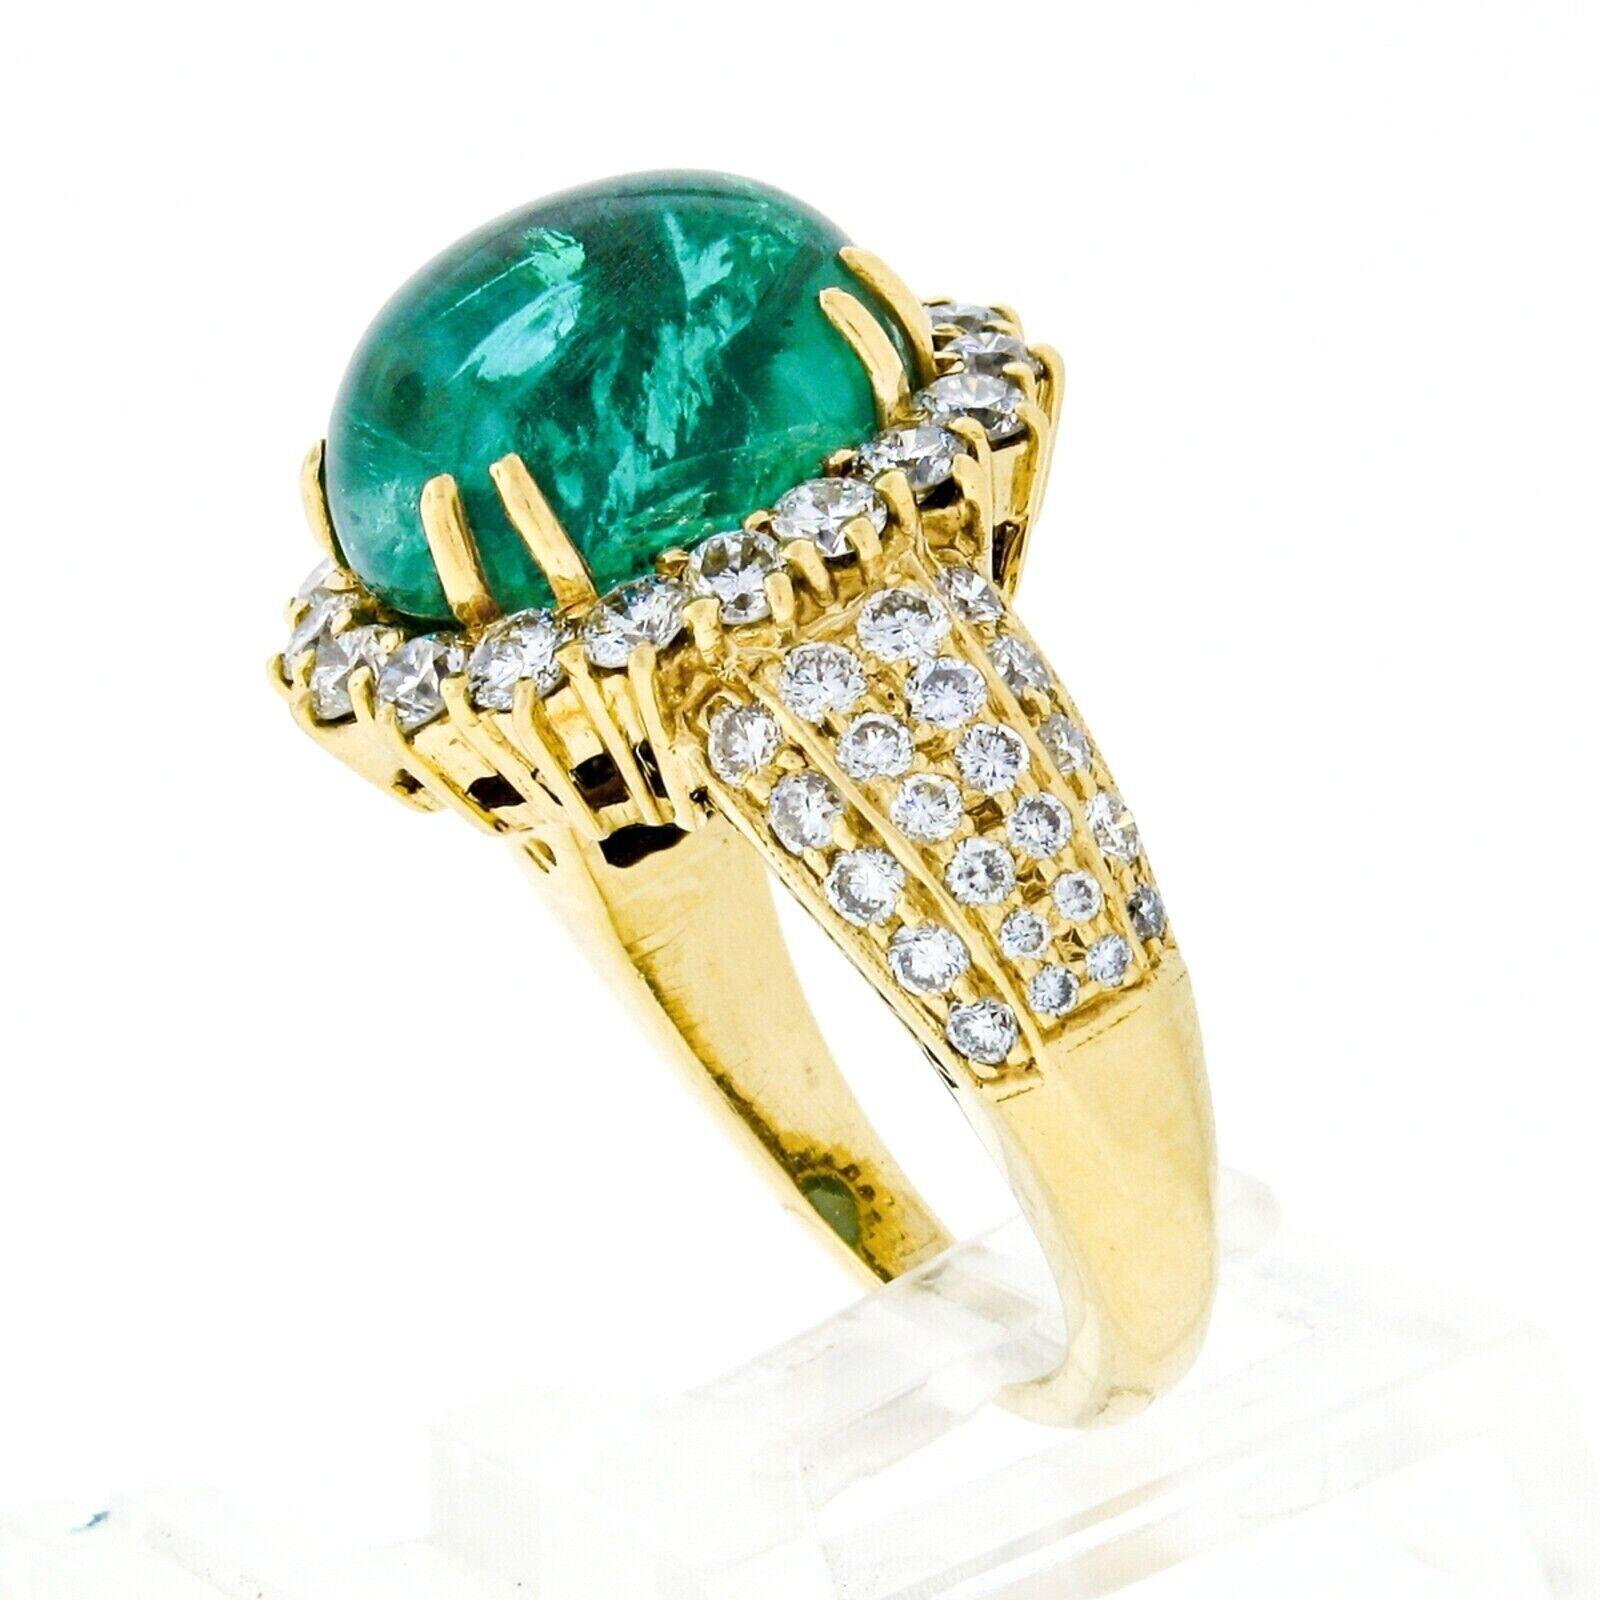 Vintage 18k Gold 8.58ct AGL Oval Cabochon Emerald and Pave Diamond Cocktail Ring For Sale 3